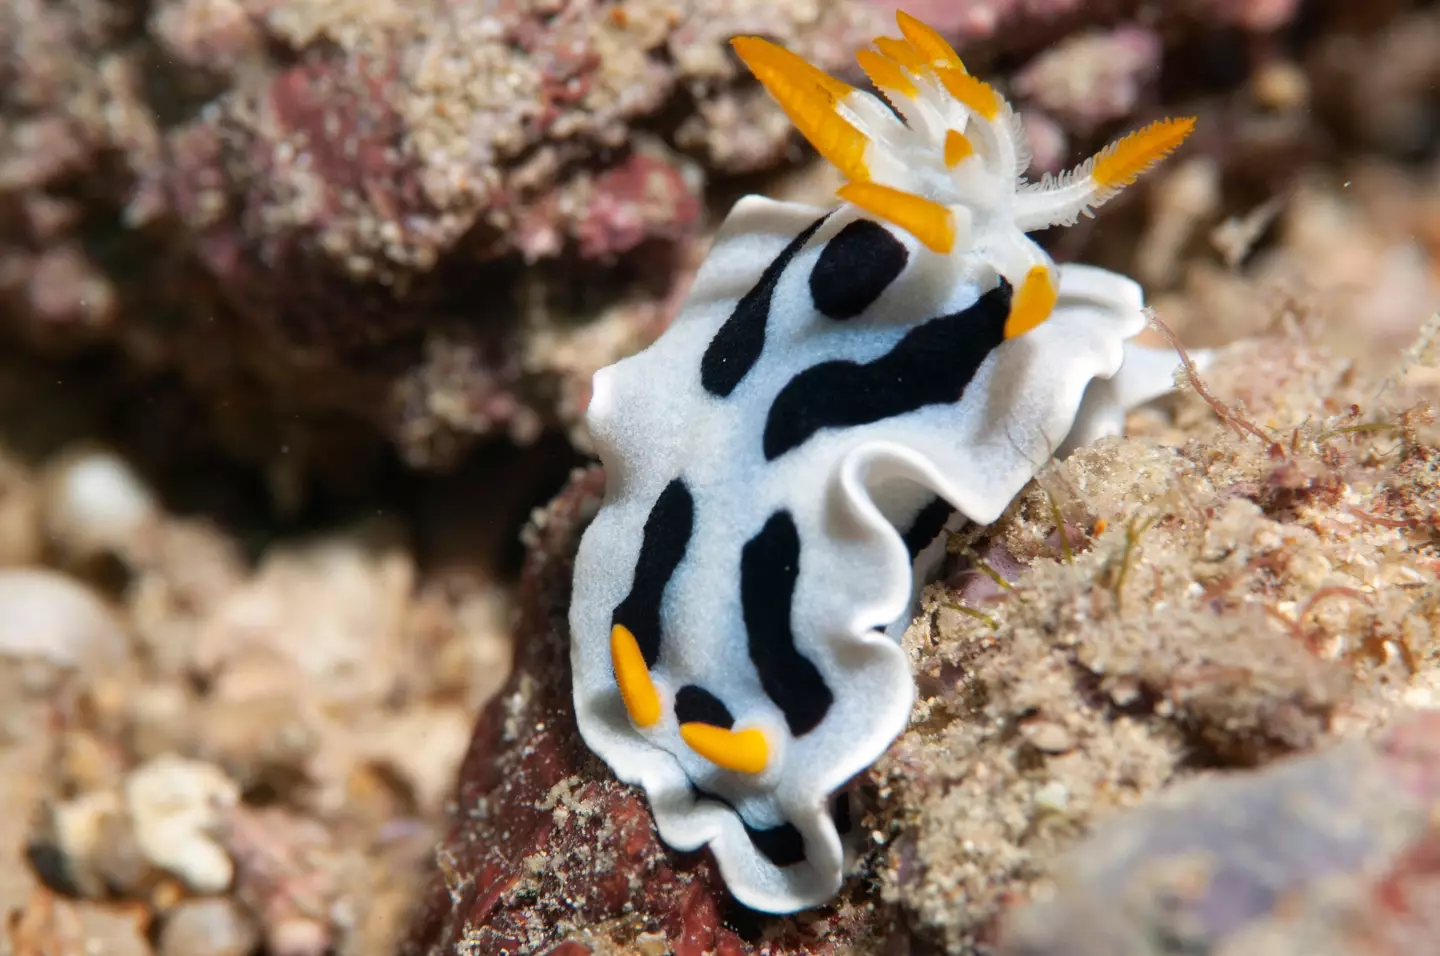 Sea Slugs come in all shapes and sizes.